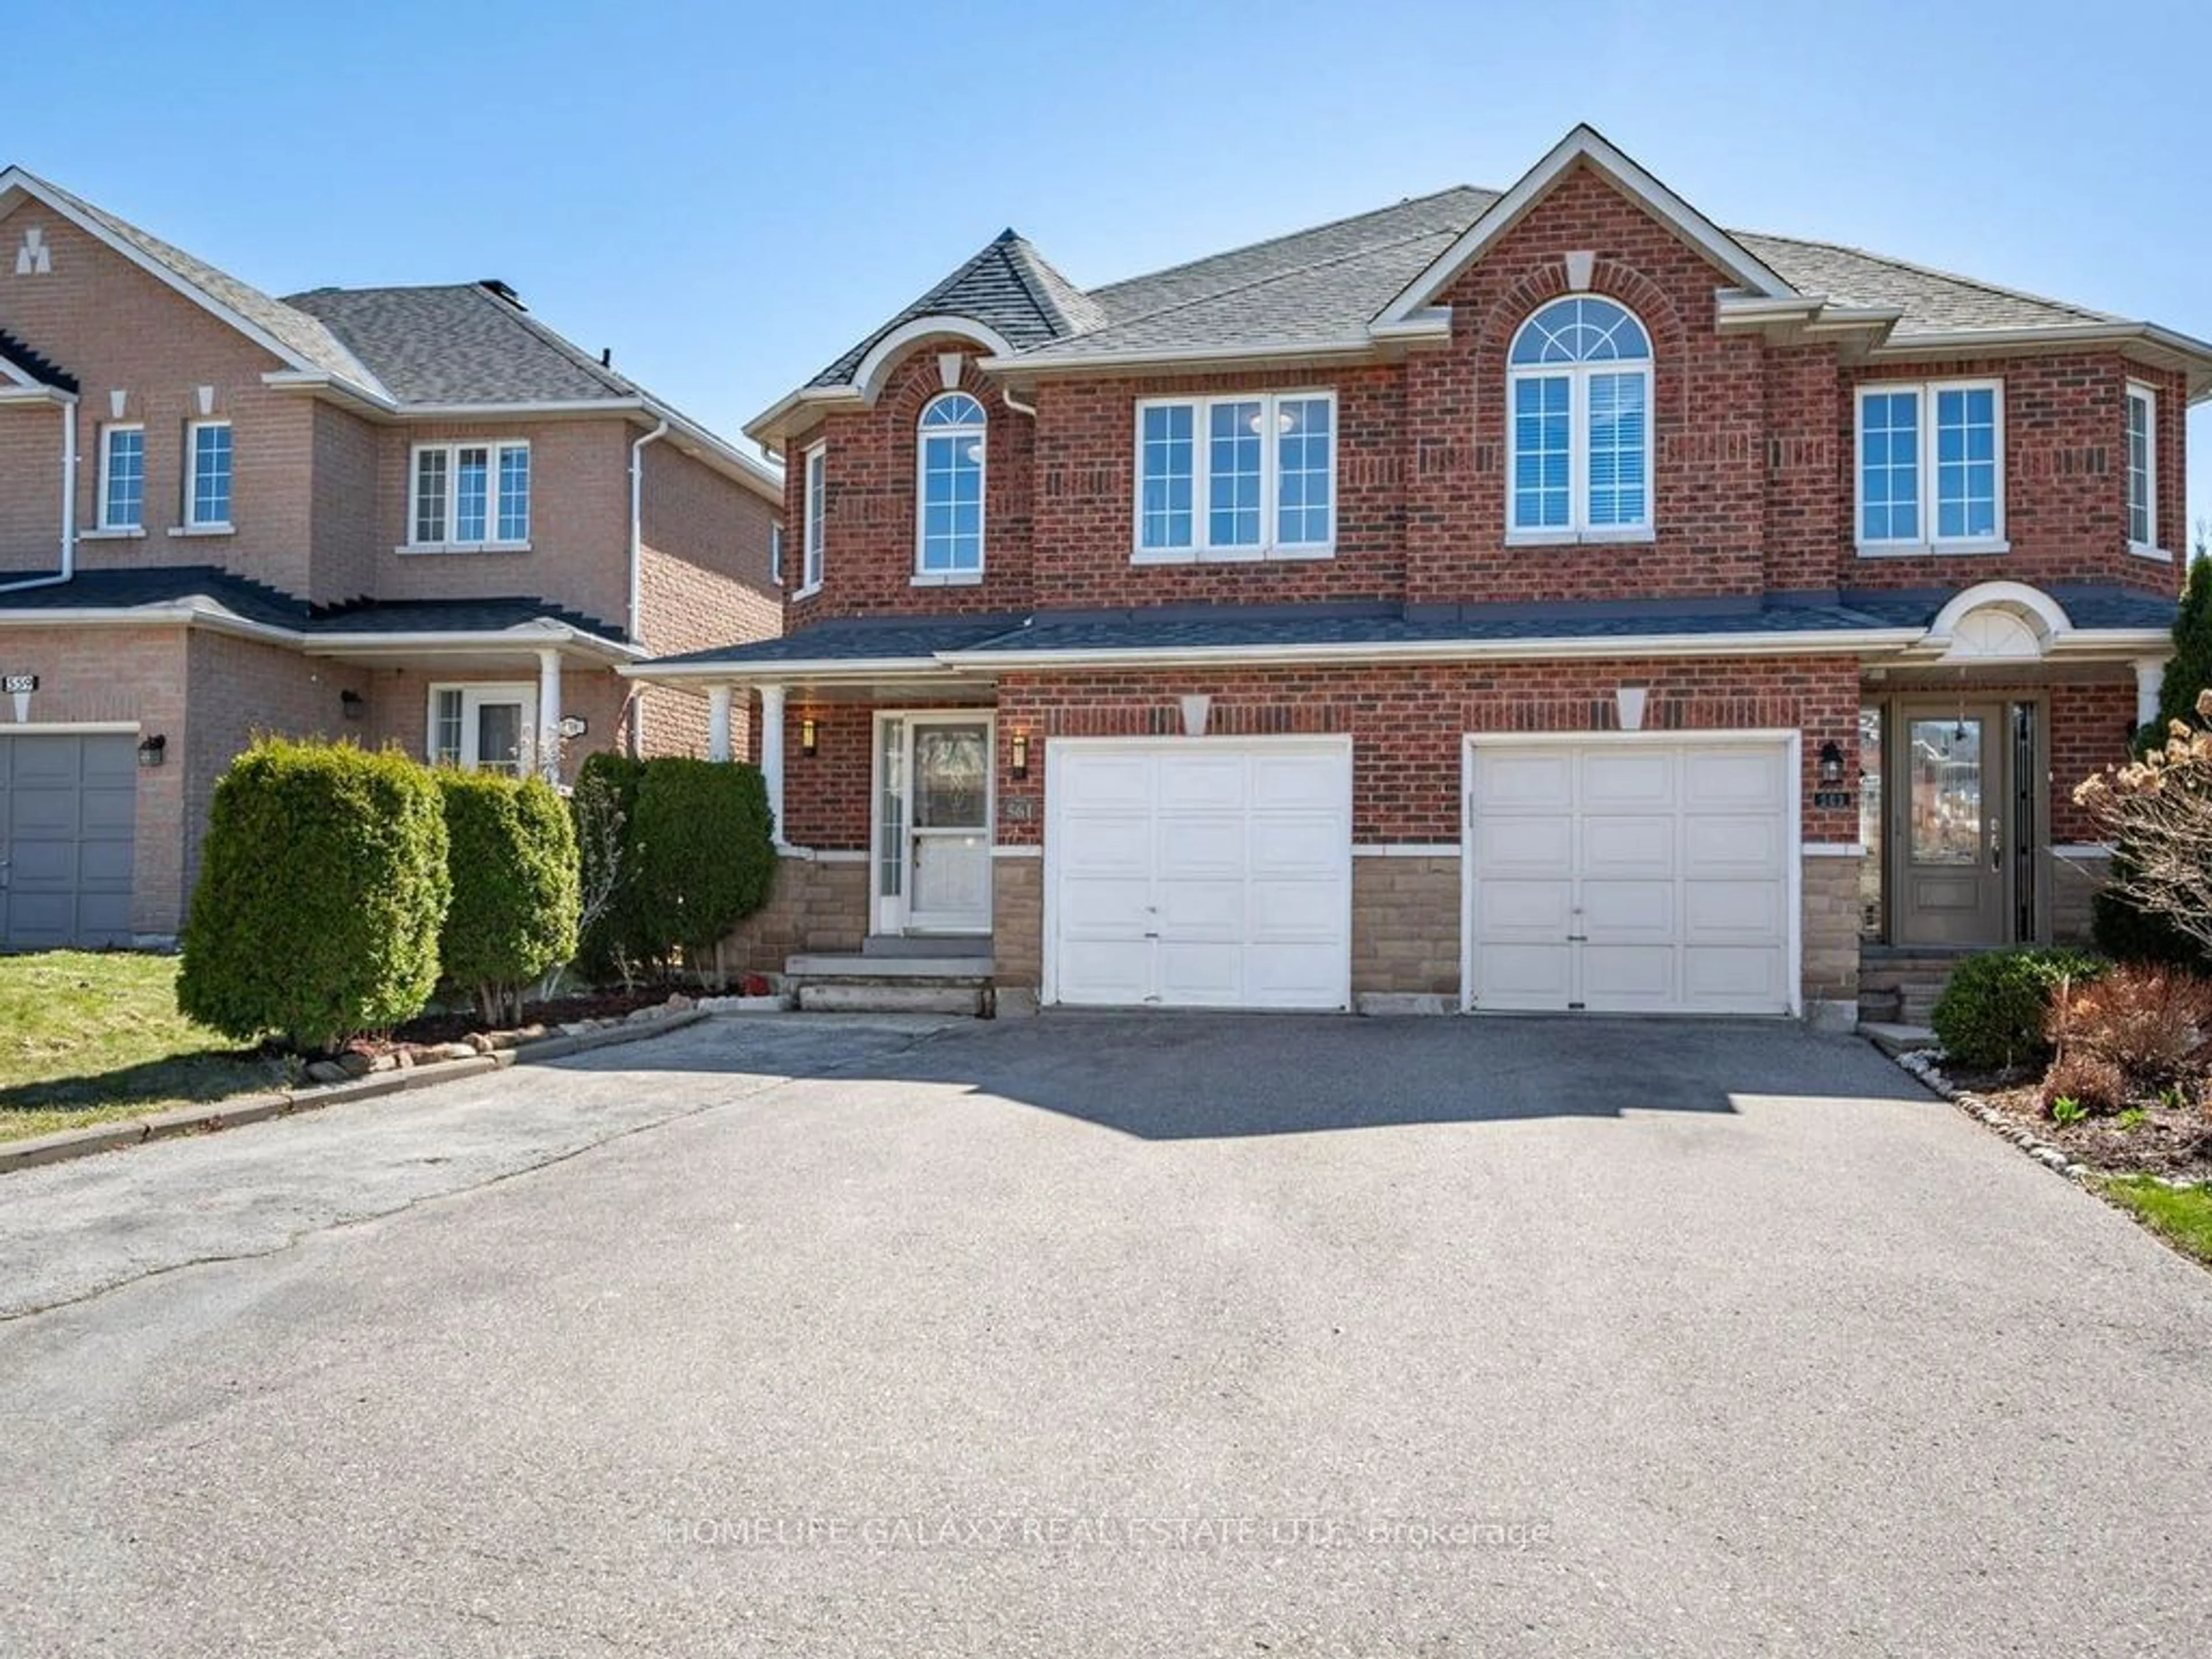 Home with brick exterior material for 561 Heddle Cres, Newmarket Ontario L3X 2K7